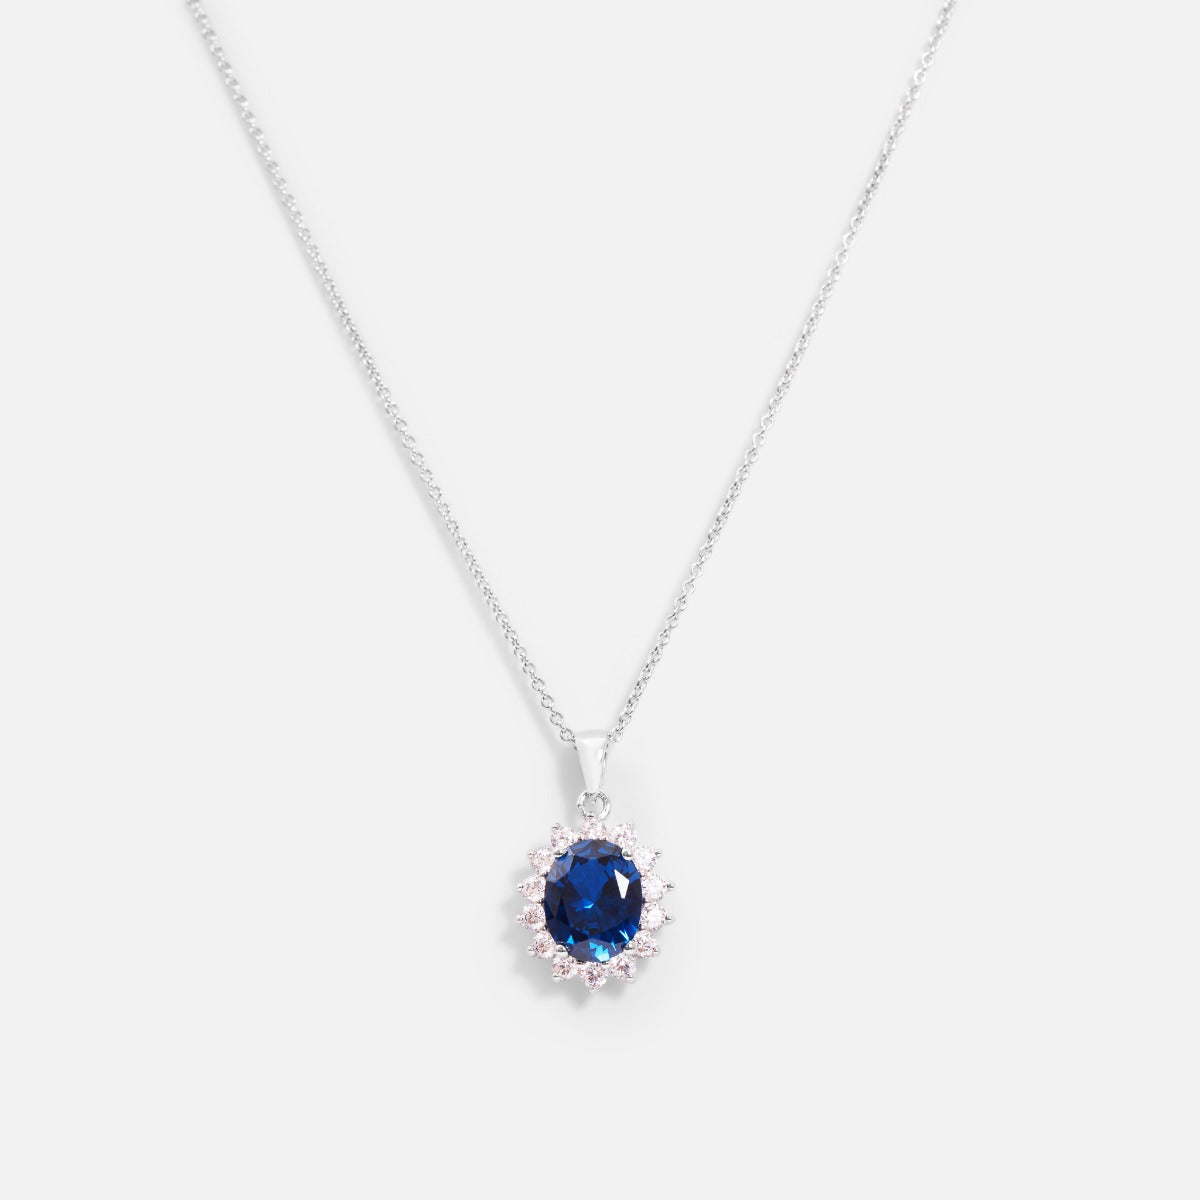 Thin sterling silver chain necklace with blue and silver cubic zirconia pendant